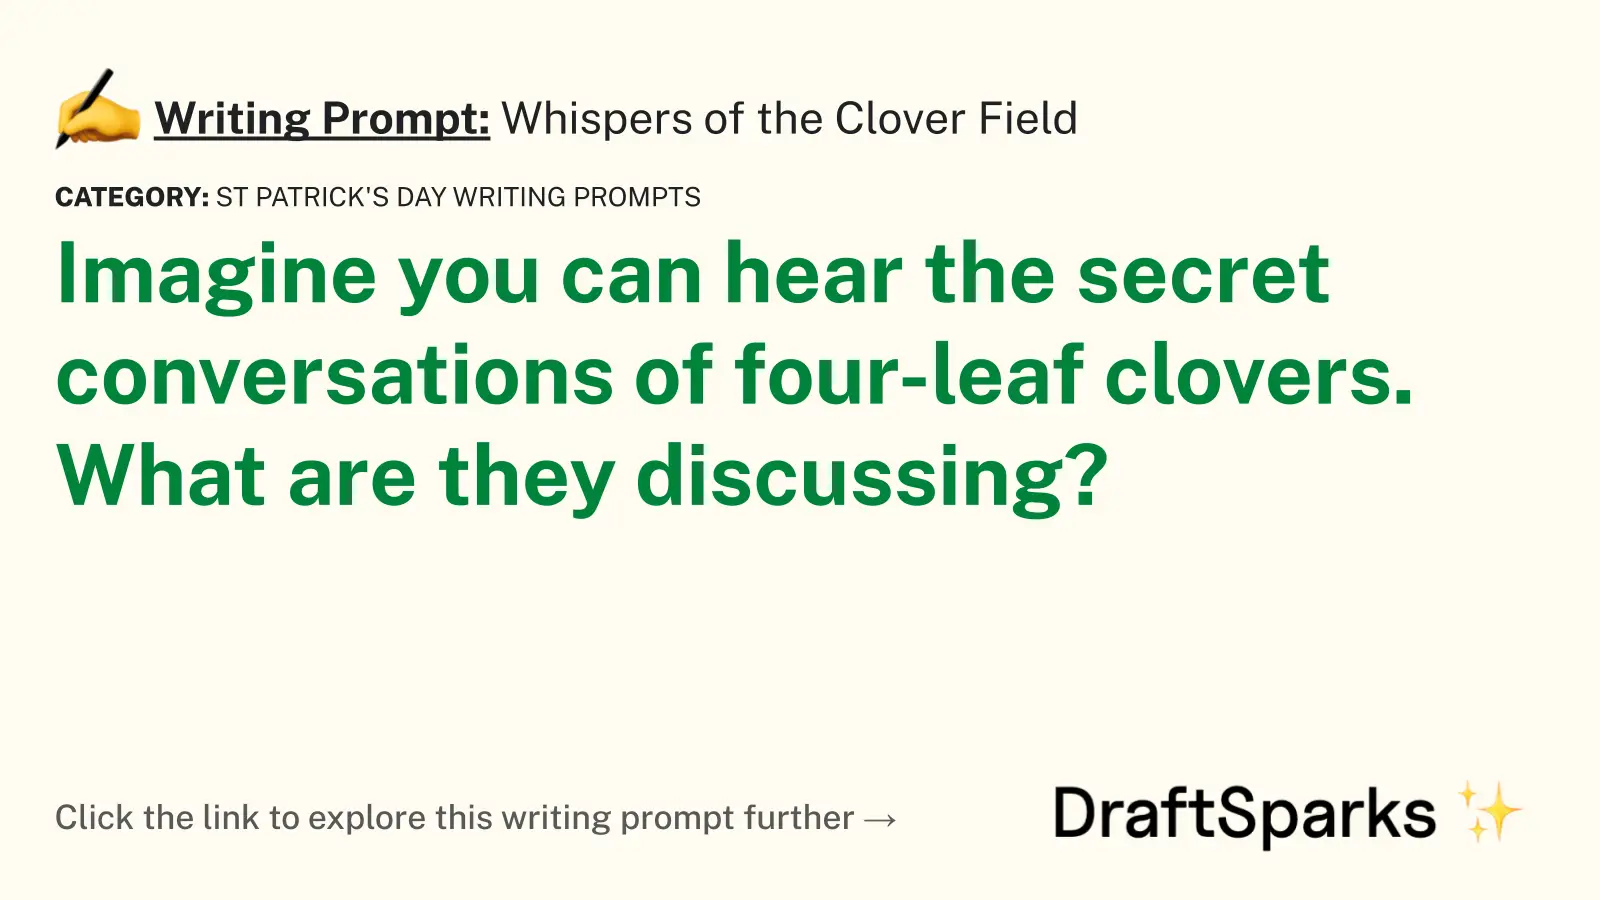 Whispers of the Clover Field